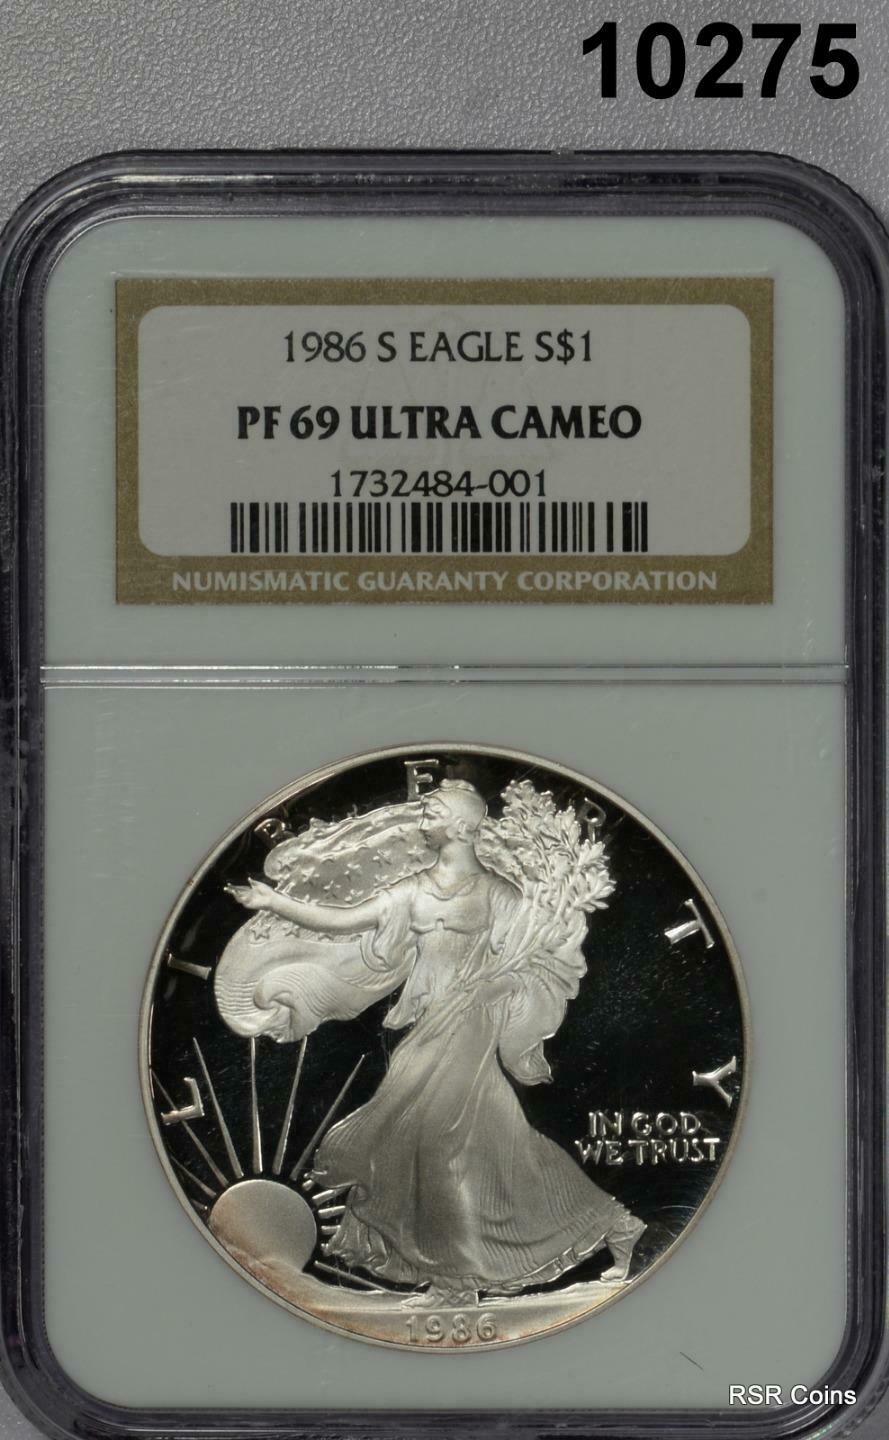 1986 S SILVER EAGLE $1 NGC CERTIFIED PF69 ULTRA CAMEO 1ST YEAR!! #10275